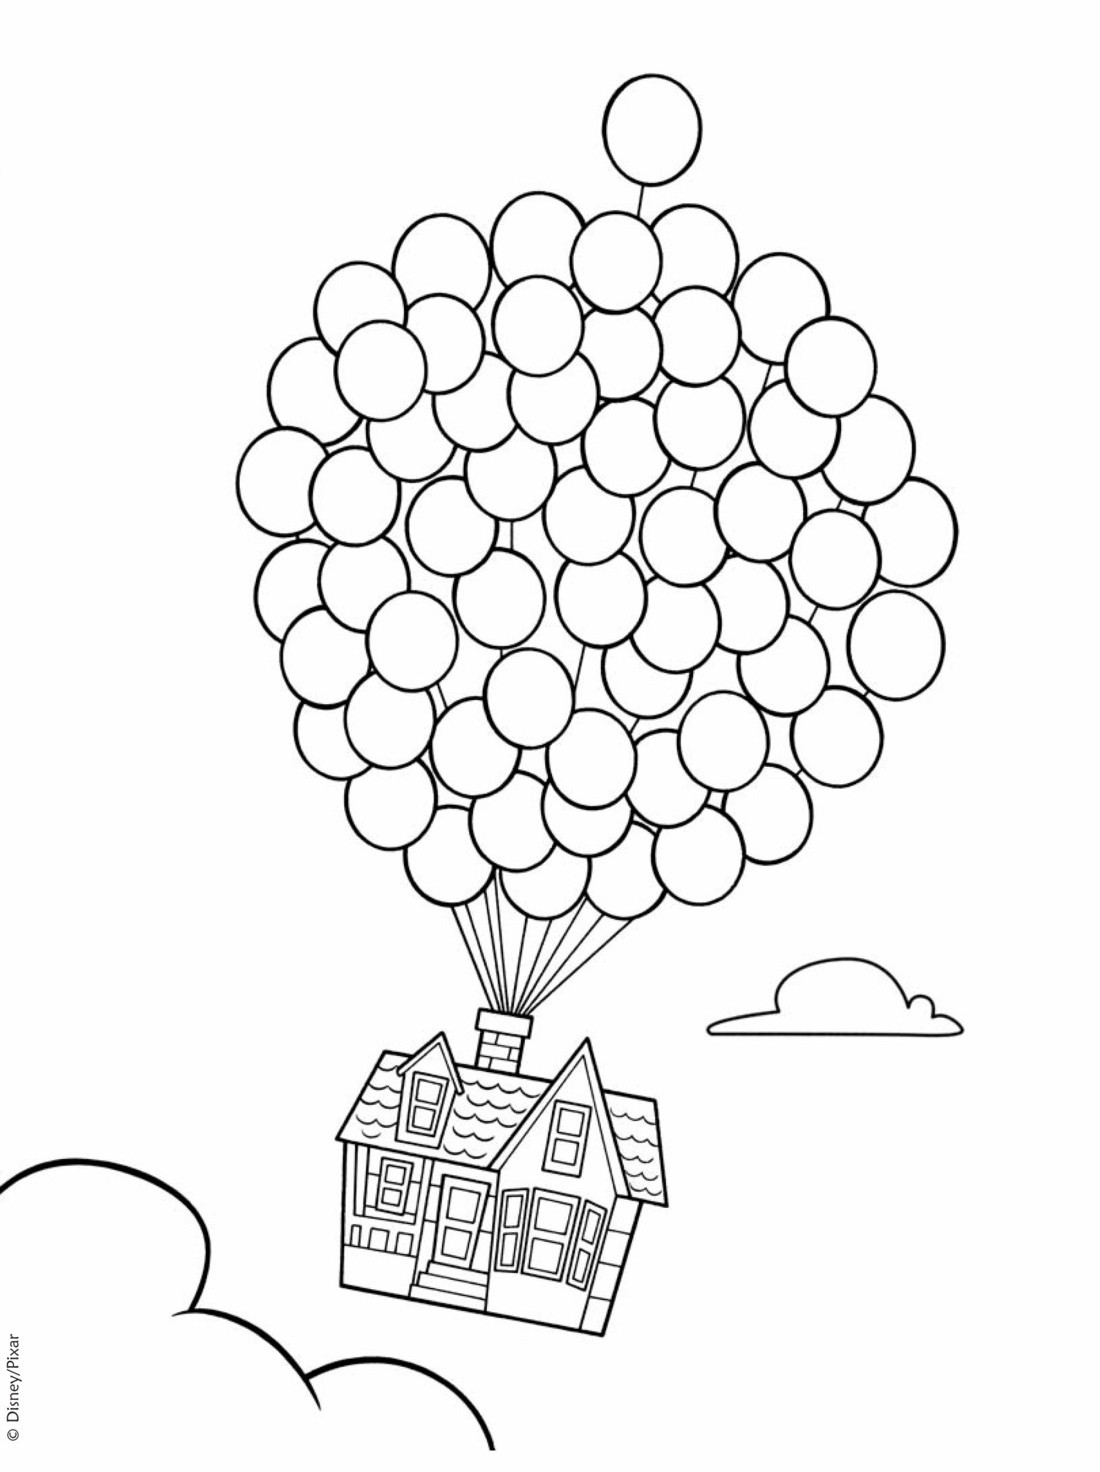 Download Up for children - Up Kids Coloring Pages